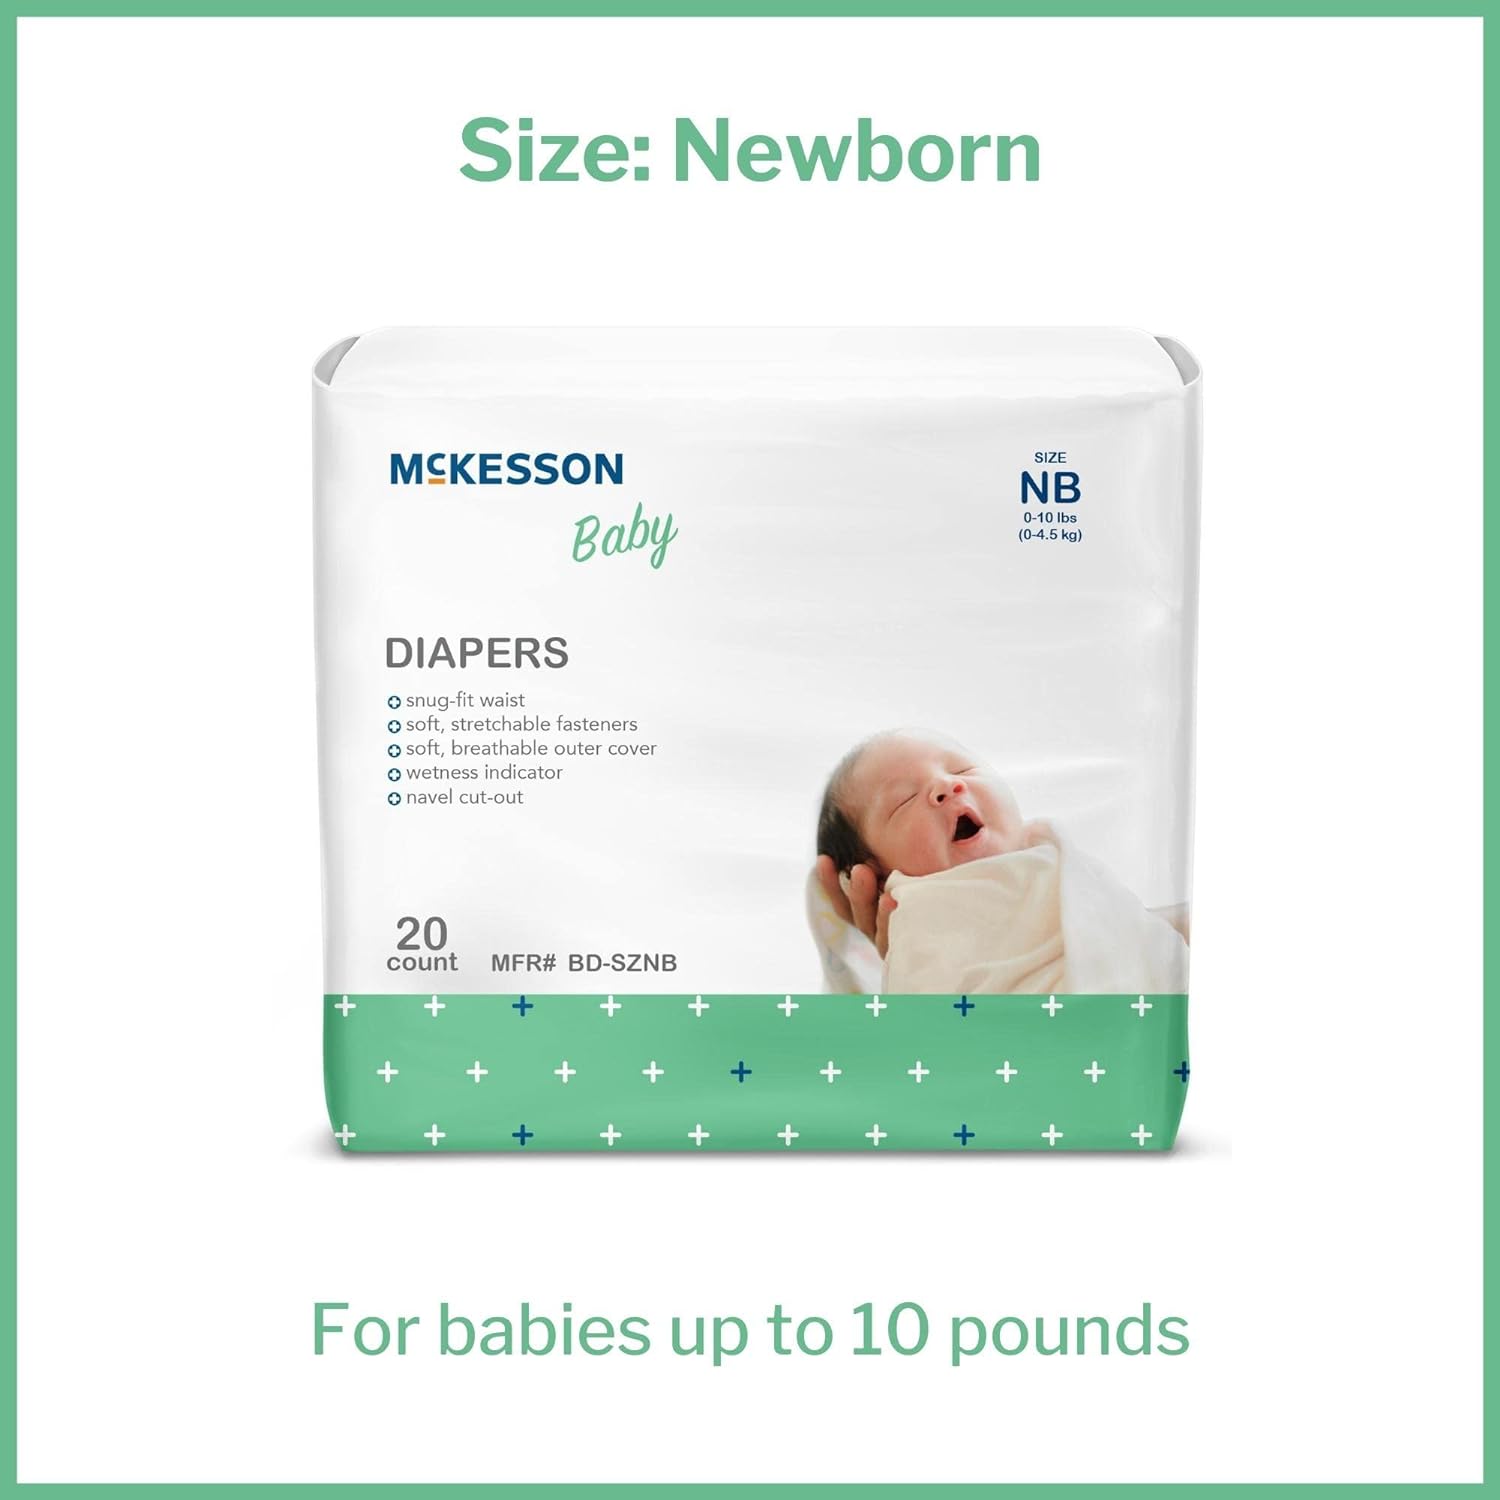 McKesson Baby Diapers for Newborns - Disposable, Breathable, Navel Cut-Out - 0 to 10 lbs, 20 Count, 1 Pack